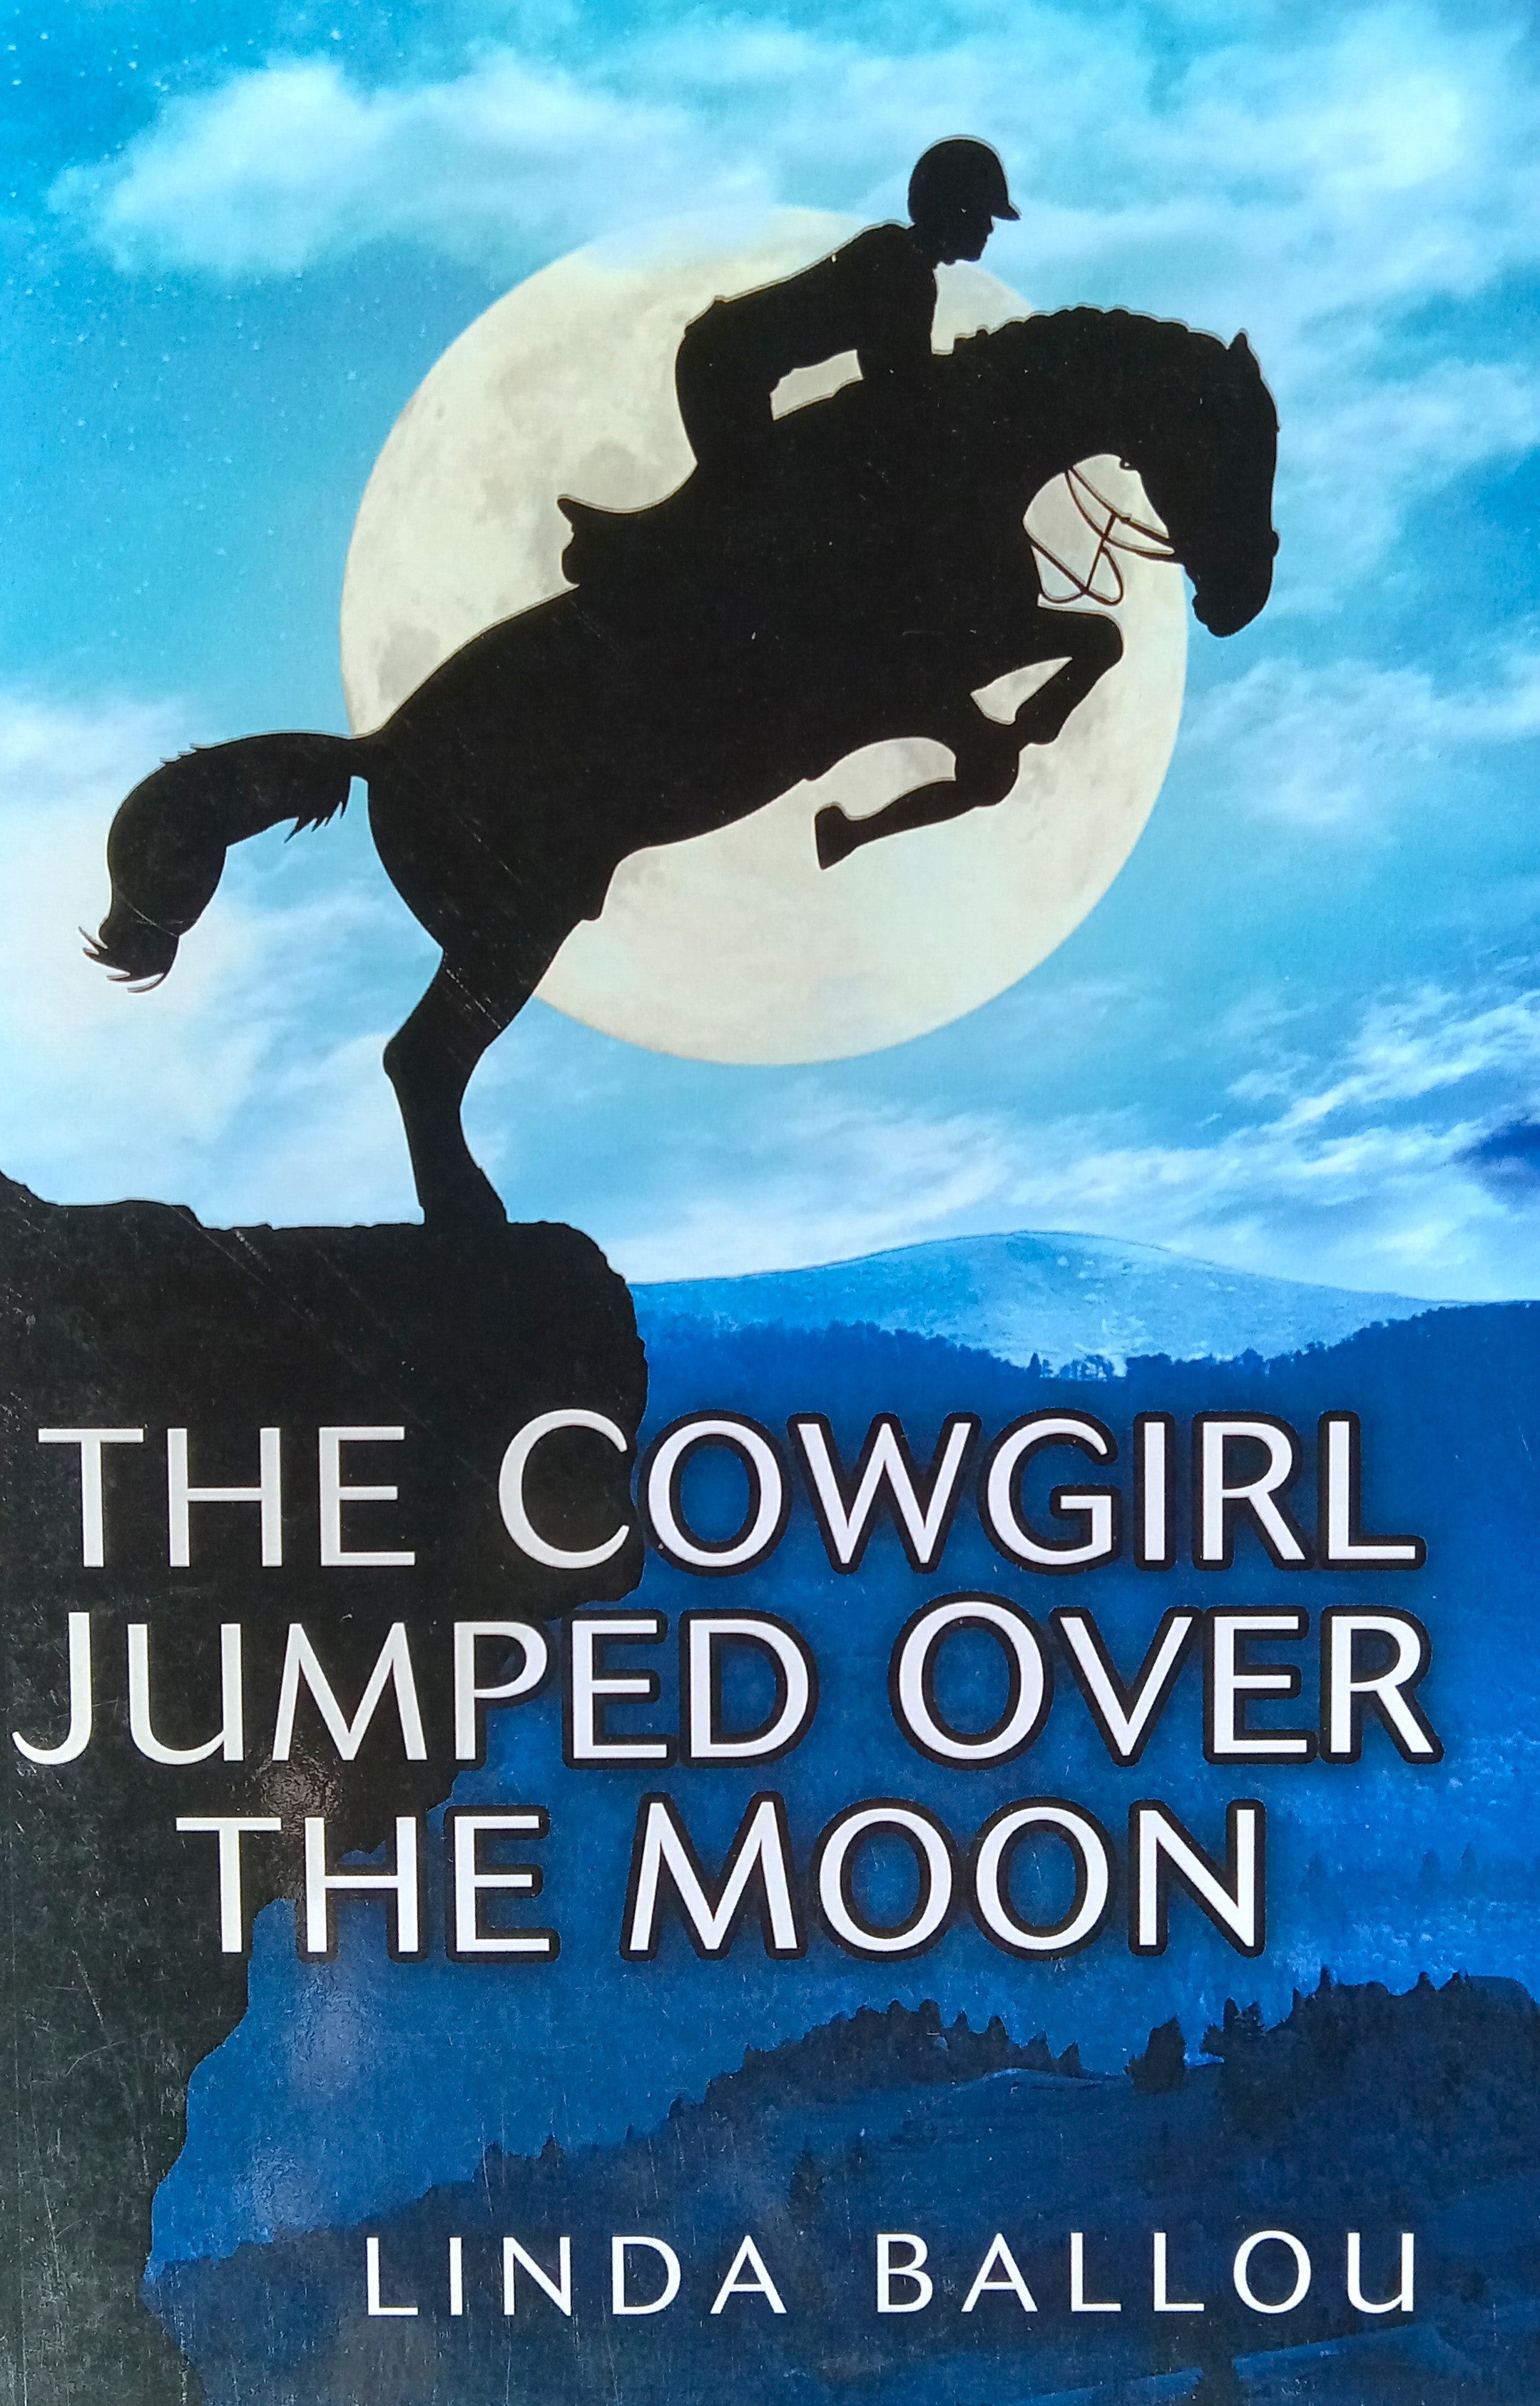 The Cowgirl Jumped Over the Moon - Signed by the Author Linda Ballou